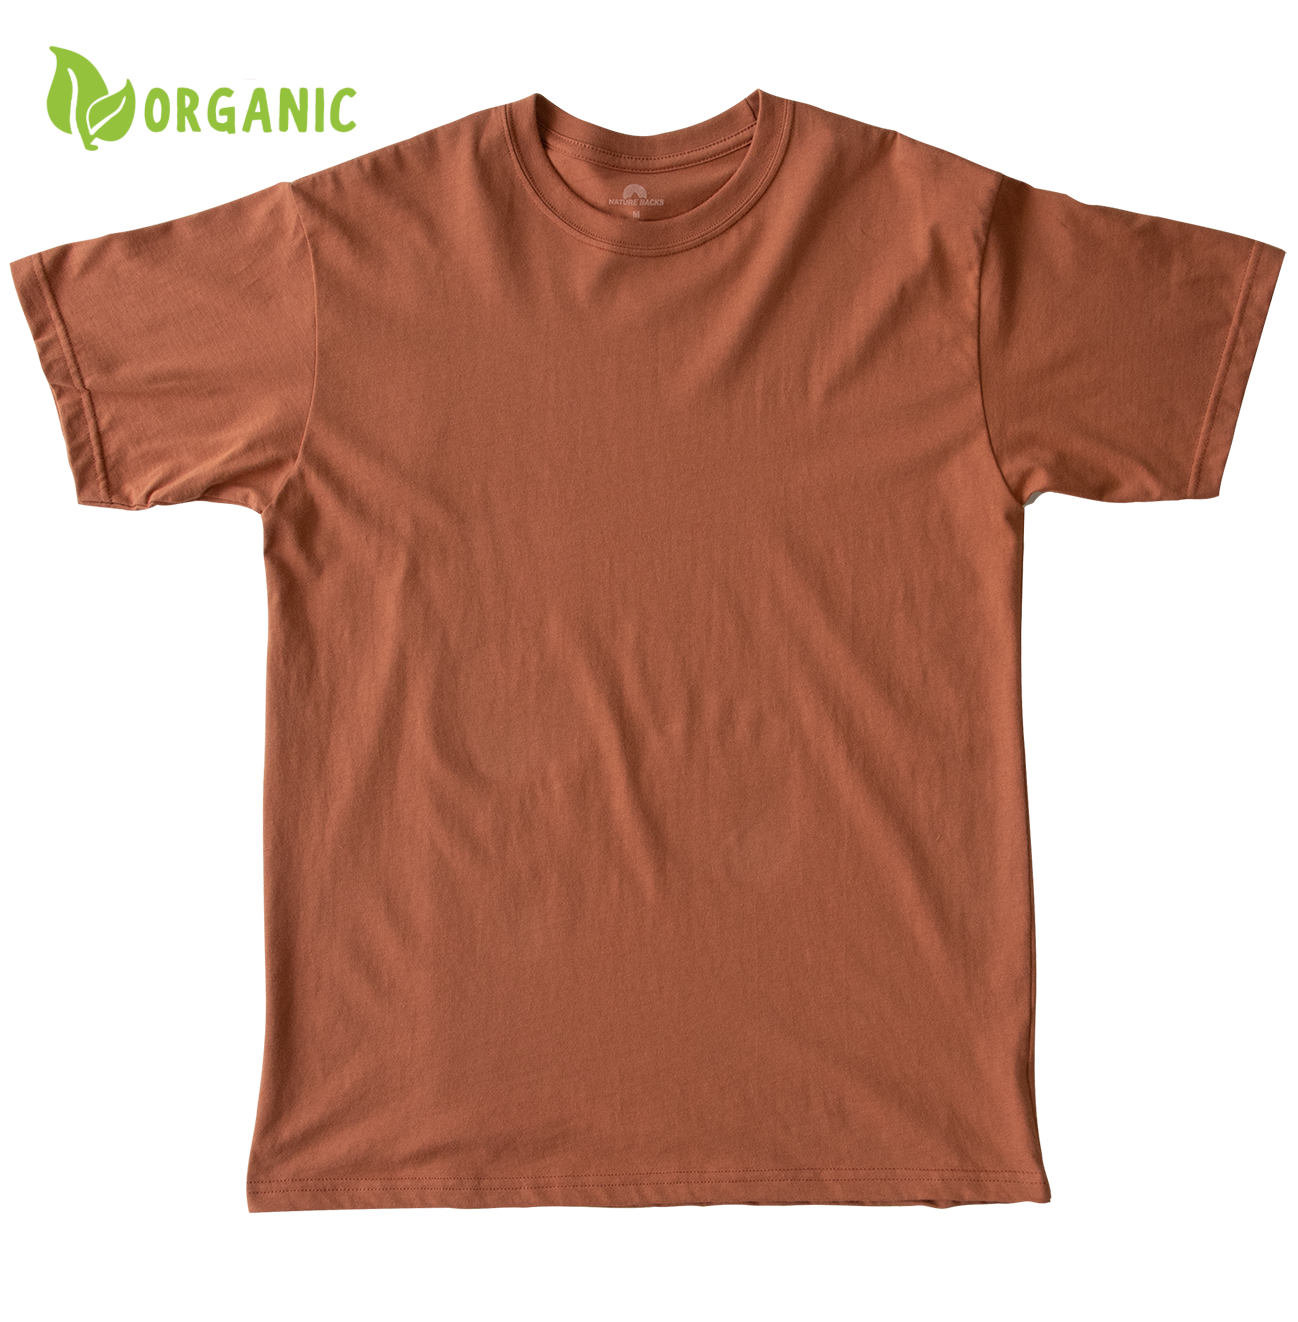 Nature Backs Short Sleeve 100% Organic Cotton T-Shirt | Minimalist Harvest Short Sleeve made with Eco-Friendly Fibers Sustainably made in the USA 